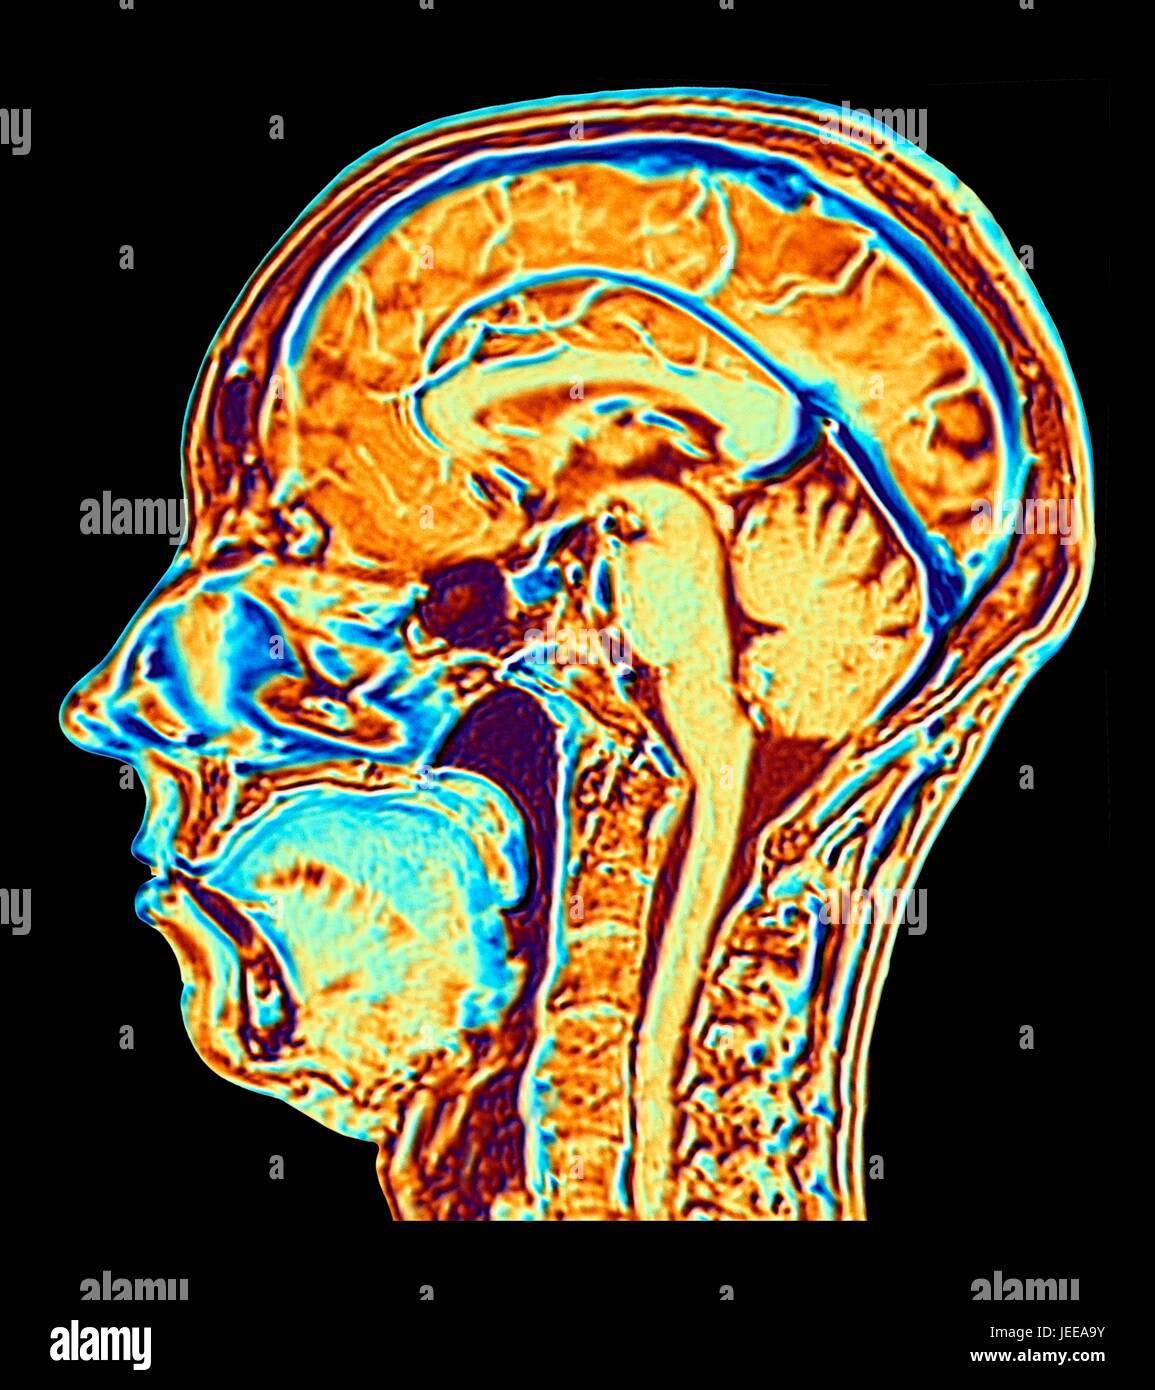 Computer enhanced false-colour Magnetic Resonance Image (MRI) of a mid-sagittal section through the head of a normal 46 year-old woman, showing structures of the brain, spine & facial tissues. Profiled features of the main part of the brain include the convoluted surface of the cerebral cortex, the corpus callosum, pons & medulla, structures of the brainstem, which are continuous with the spinal cord. The cerebellum, the centre of balance & coordination, lies to the right of the brainstem. Stock Photo